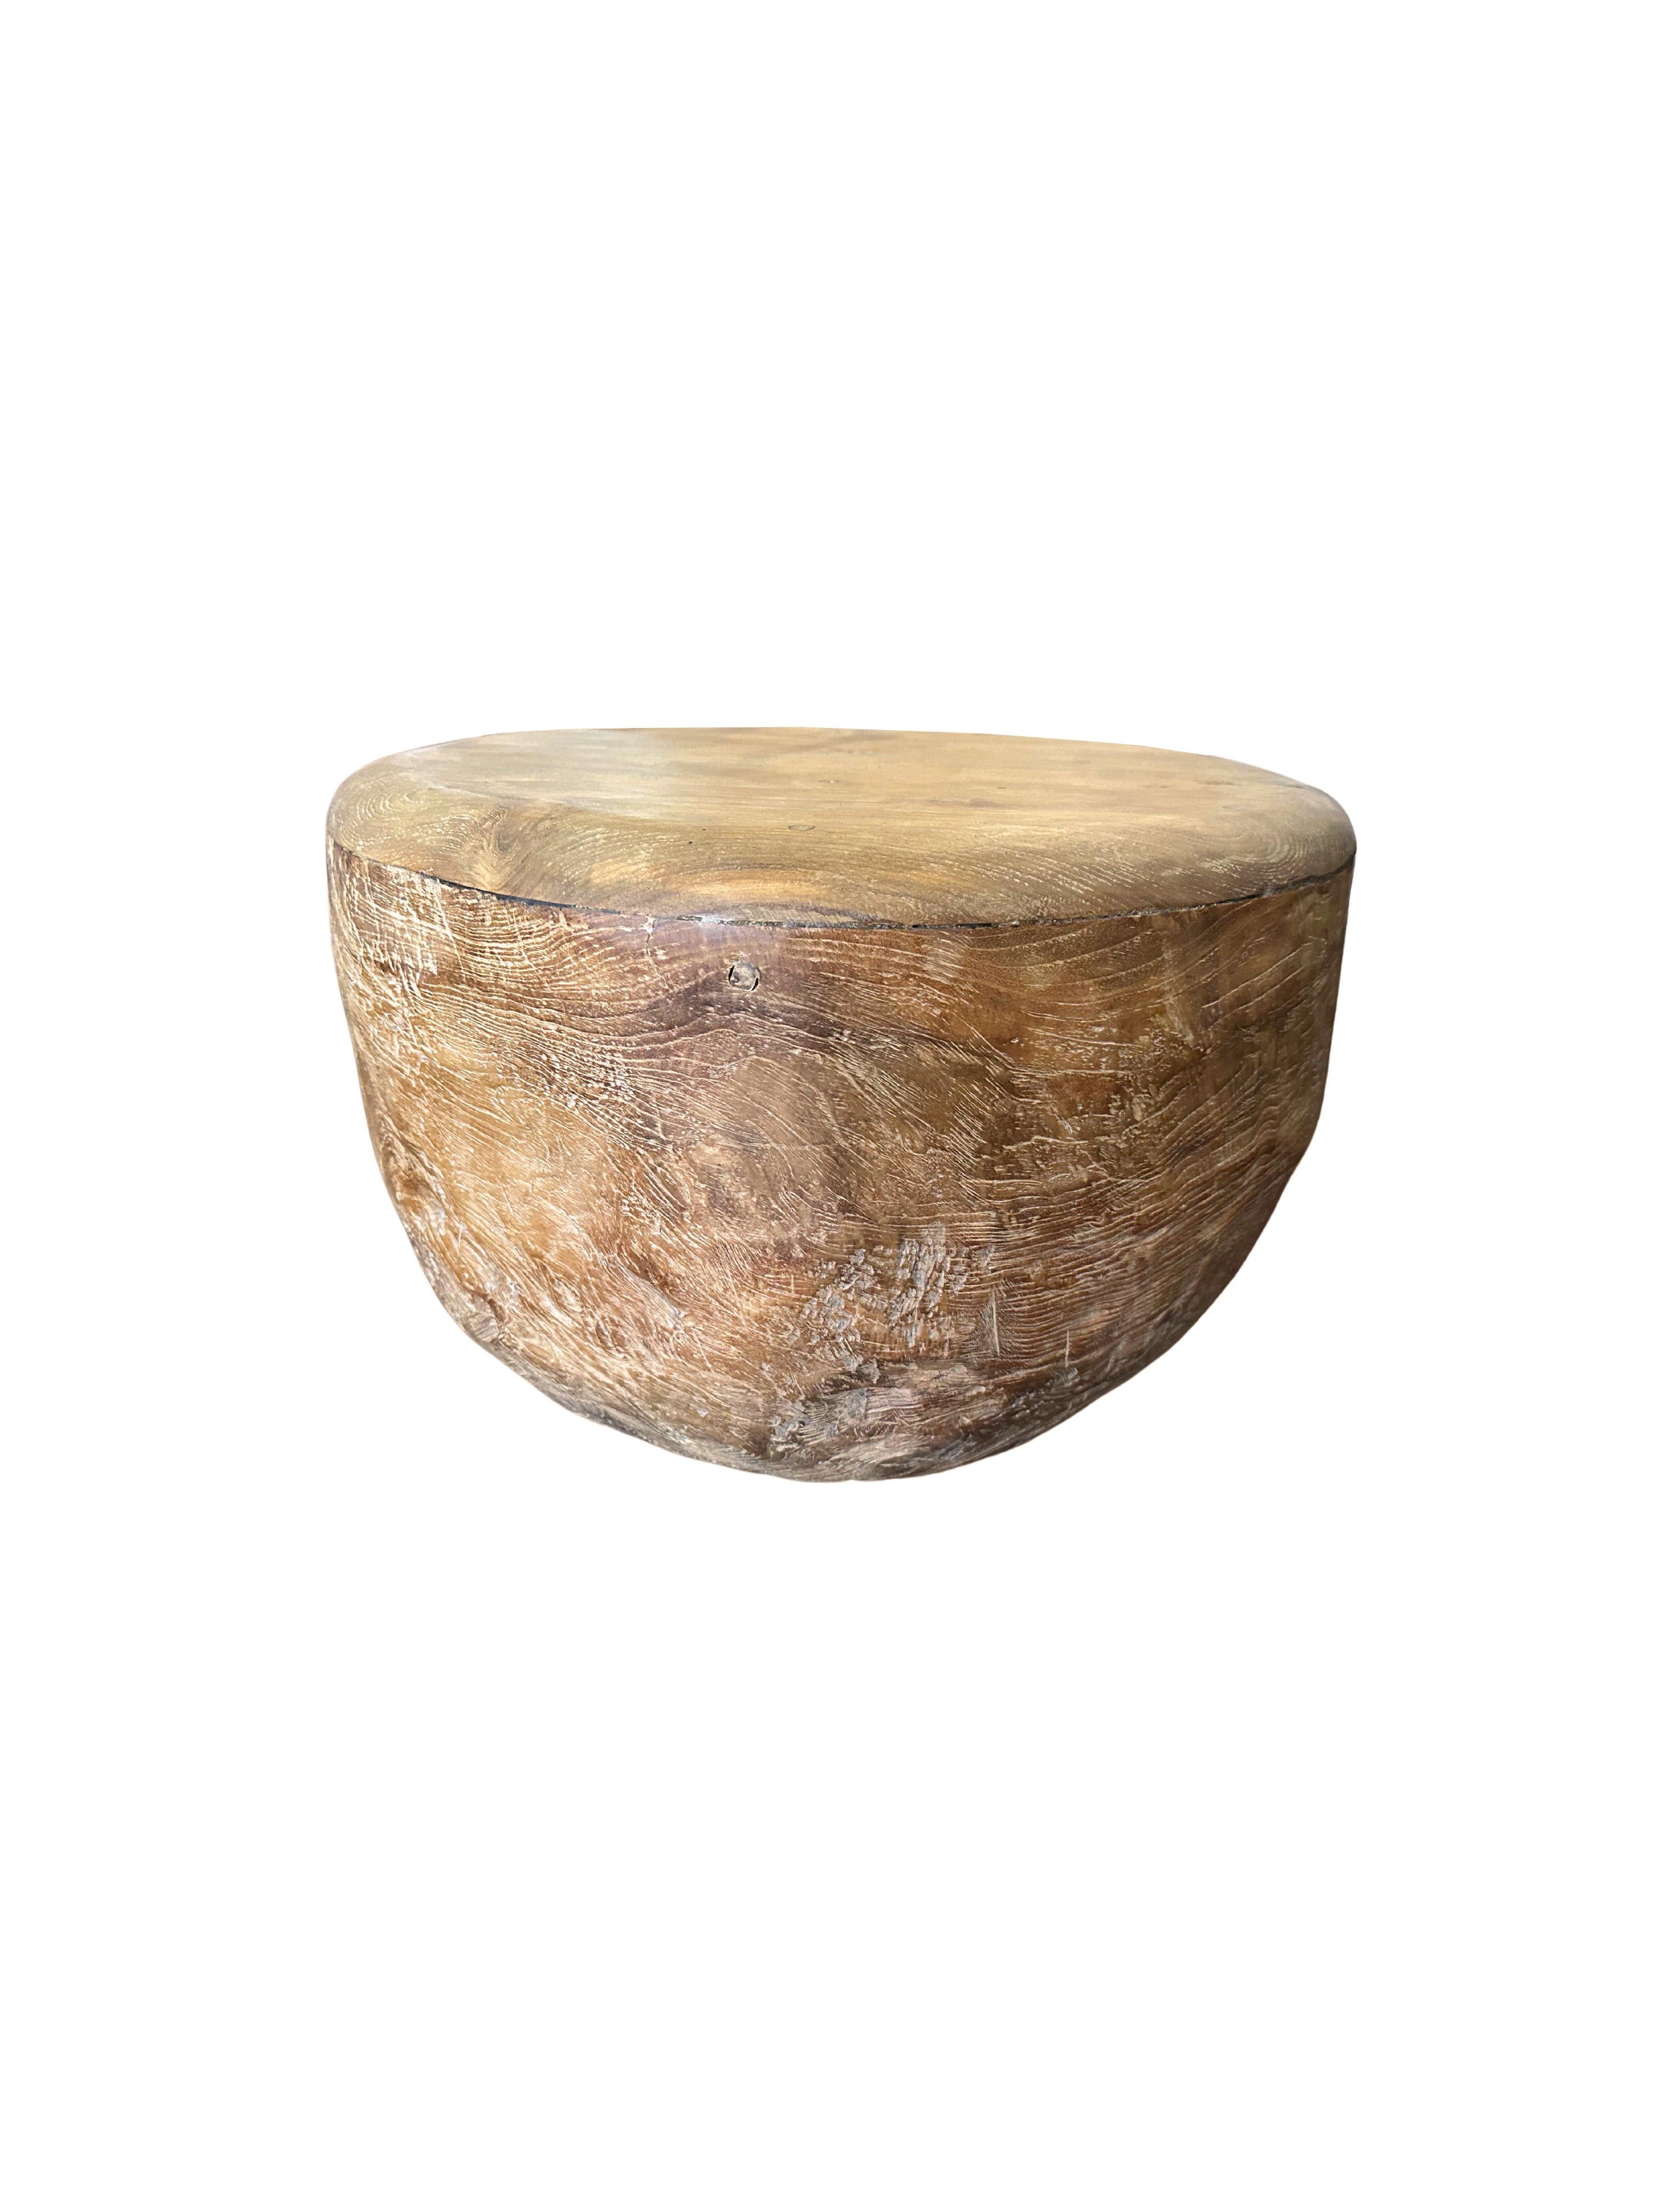 This teak burl side table was crafted on the island of Java, Indonesia. It comprises of a solid teak burl base and thin, round, sanded down table top. It features a robust structure with beautiful wood patterning. Perfect to be used as a coffee